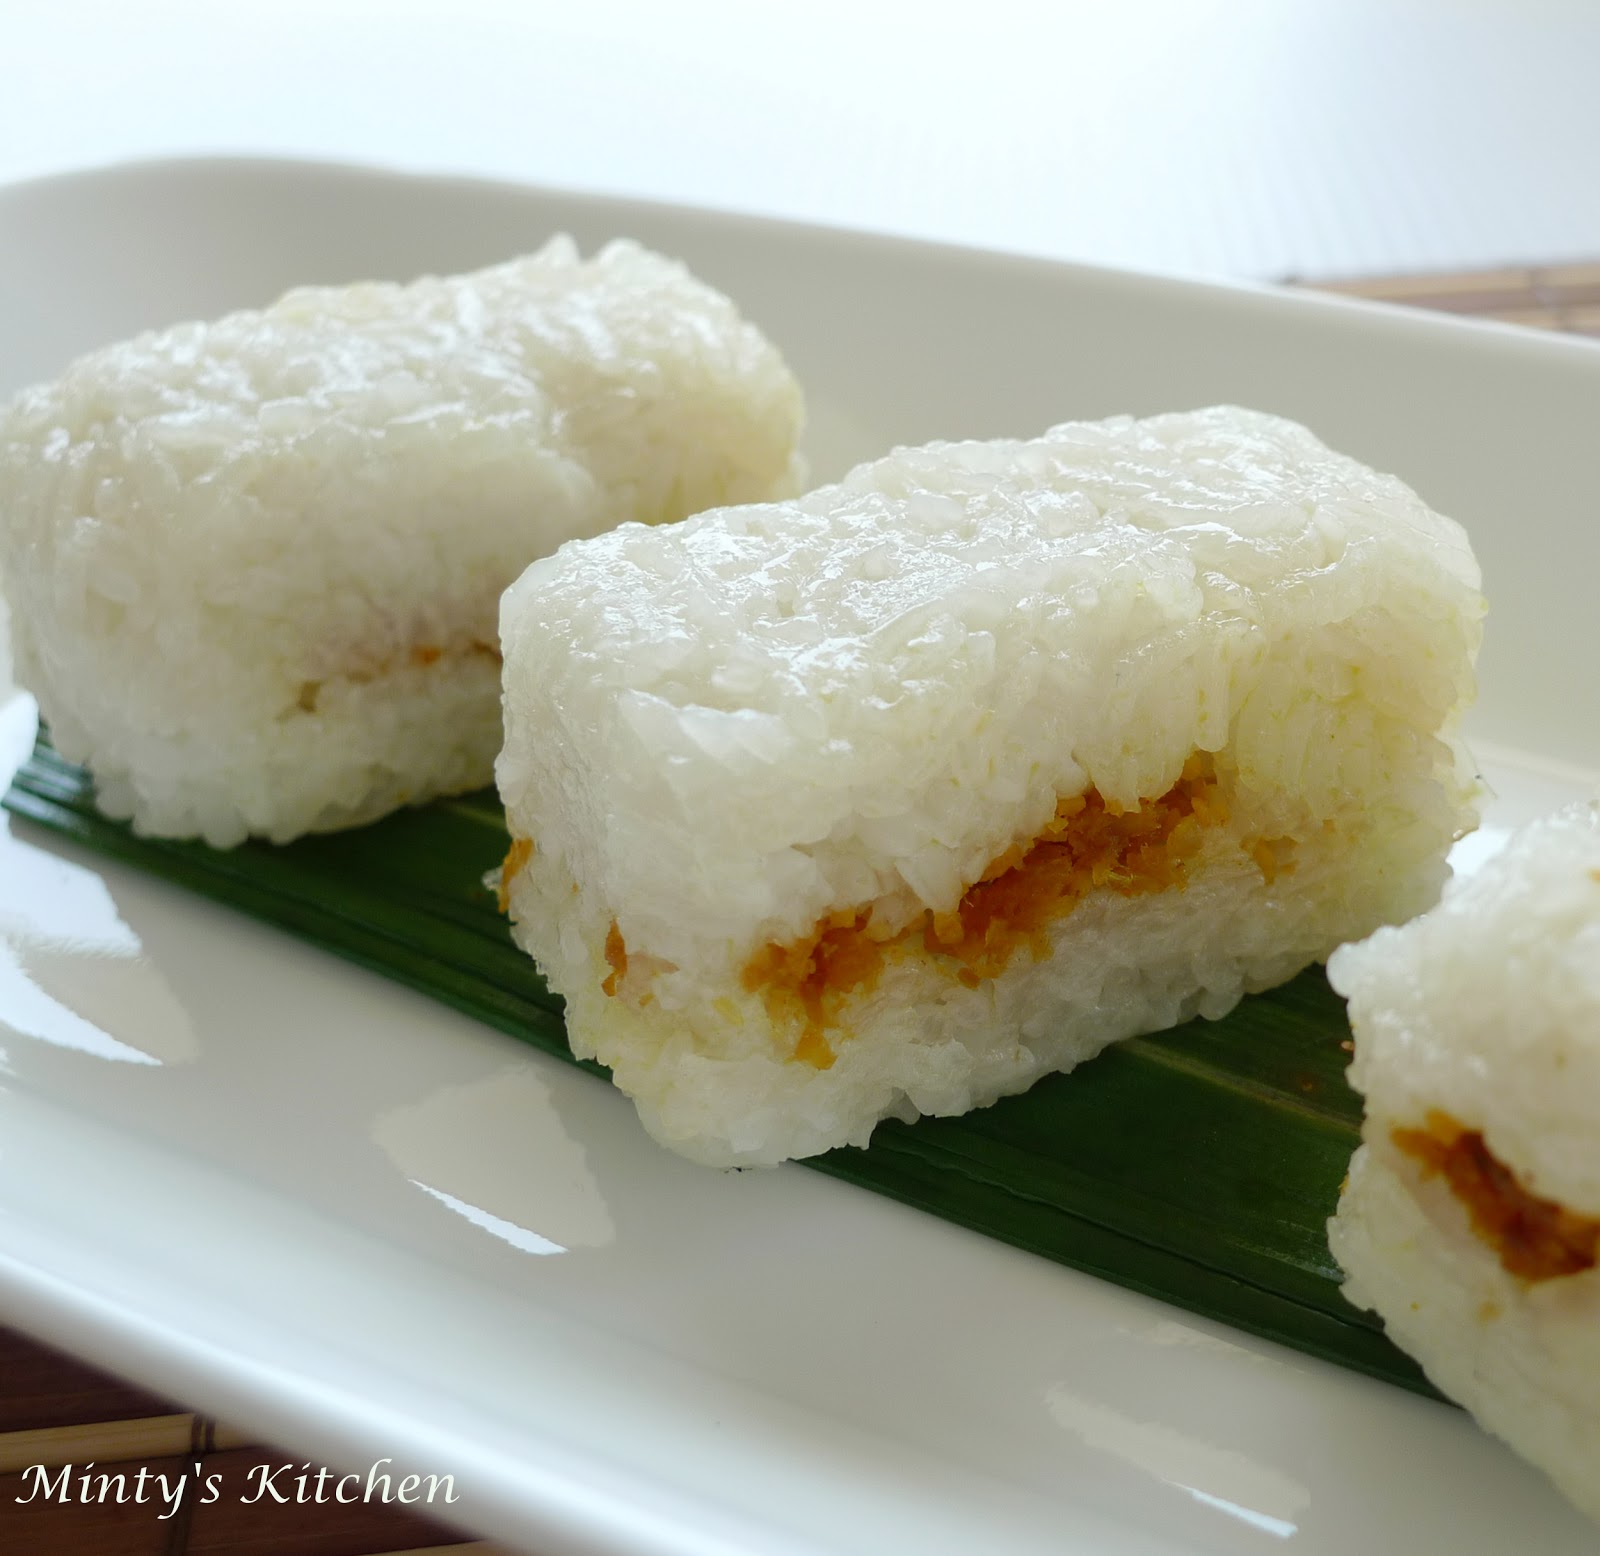 Minty's Kitchen: Spicy Glutinous Rice Rolls (Rempah Udang)